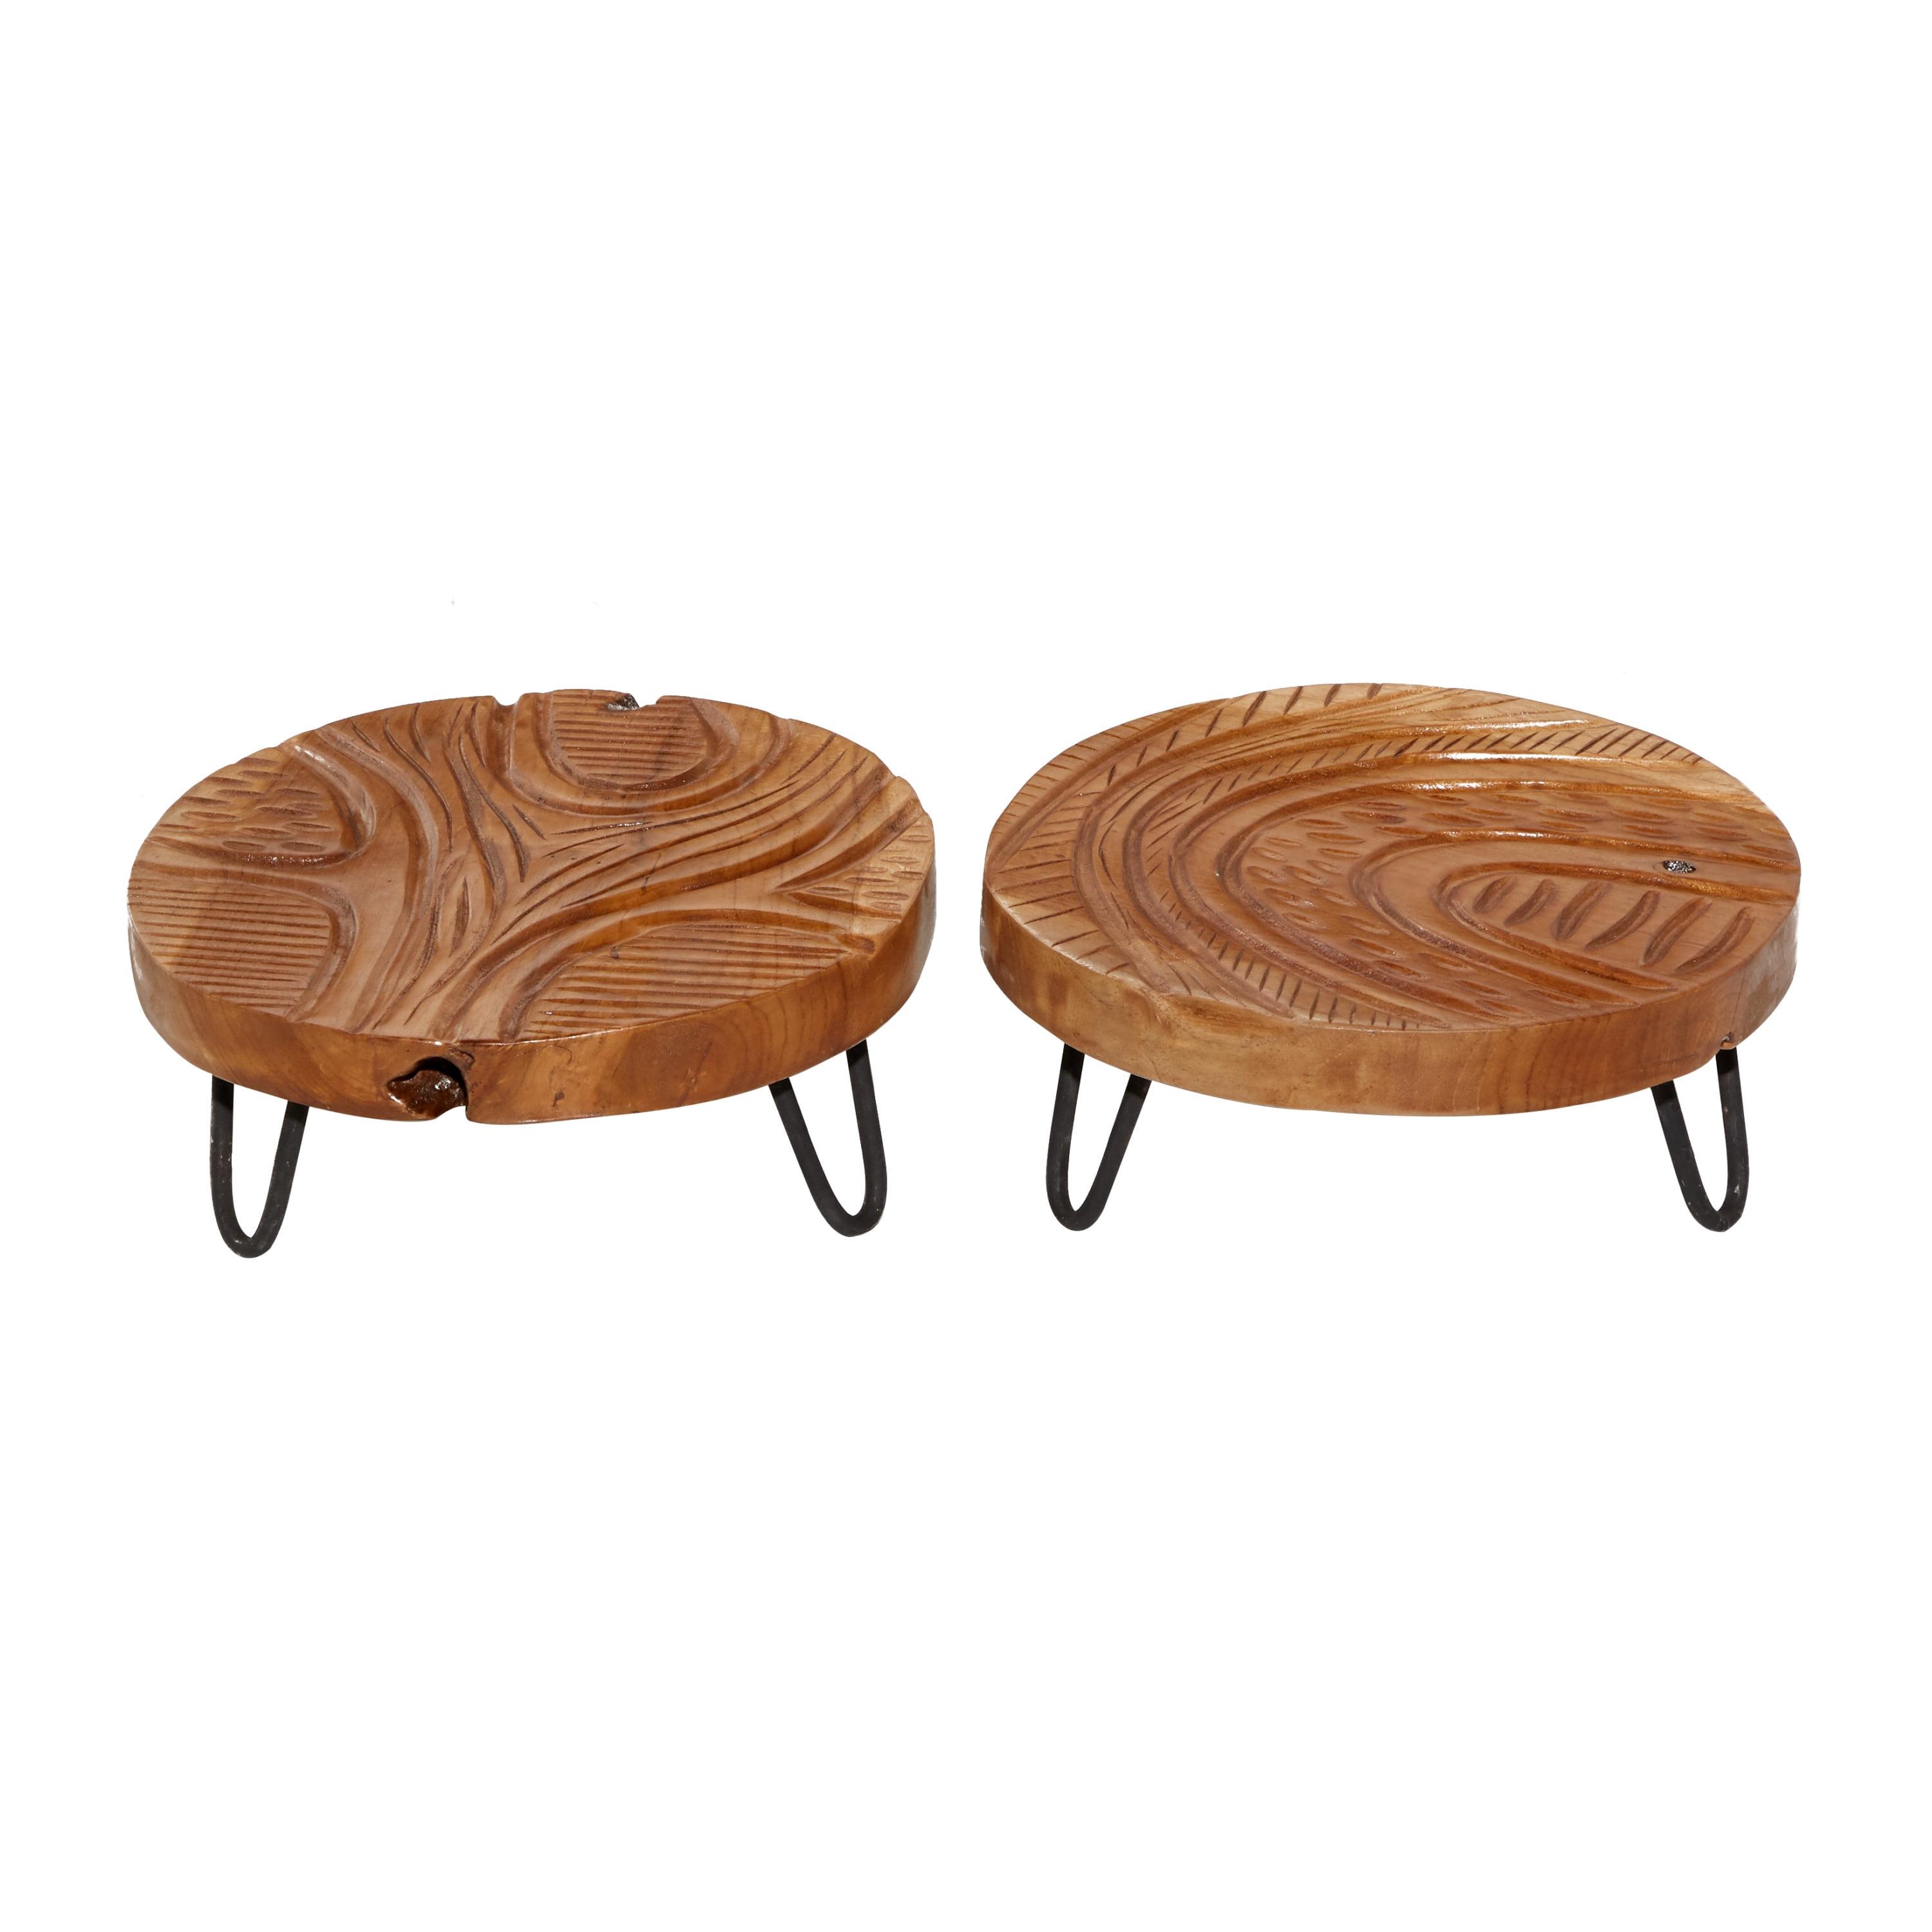 Rustic Teak Wood Carved Floral Trays with Hairpin Legs, Set of 2